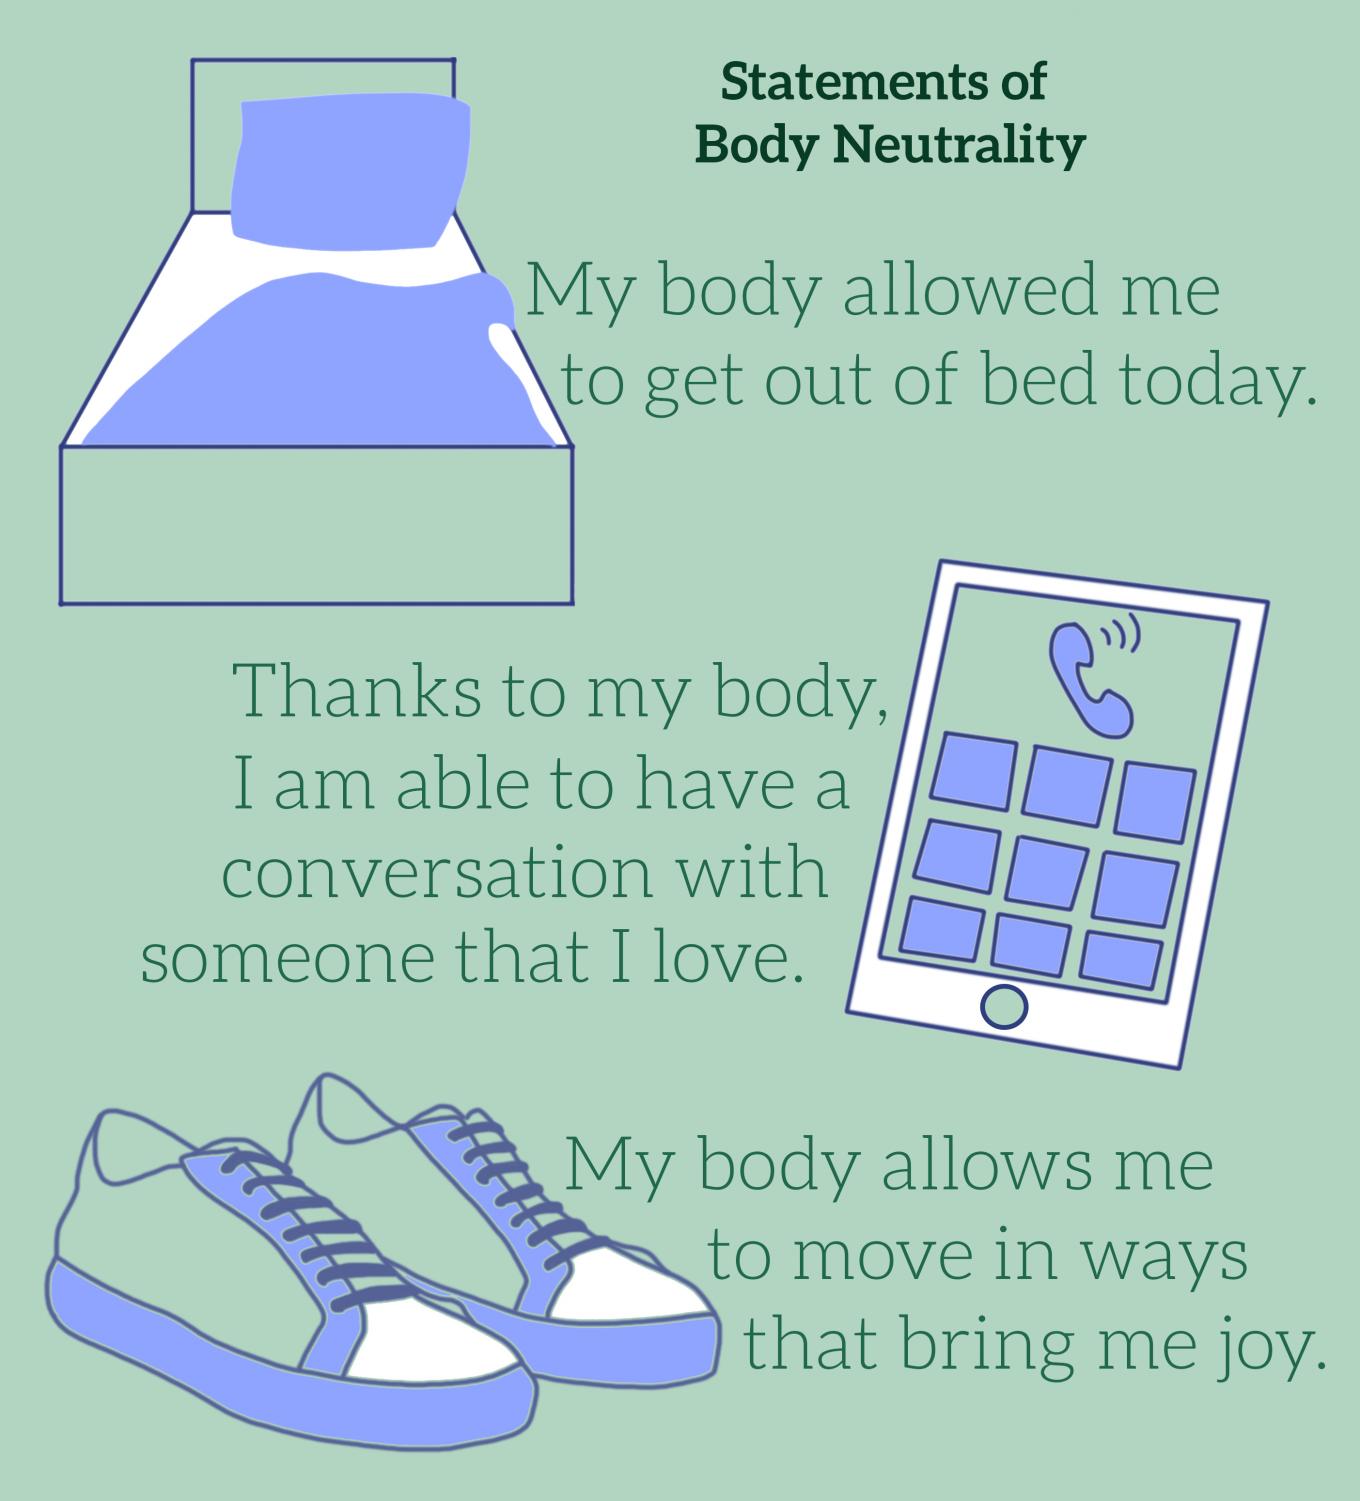 Why the Body Neutrality Movement Hasn't Won Me Over Yet